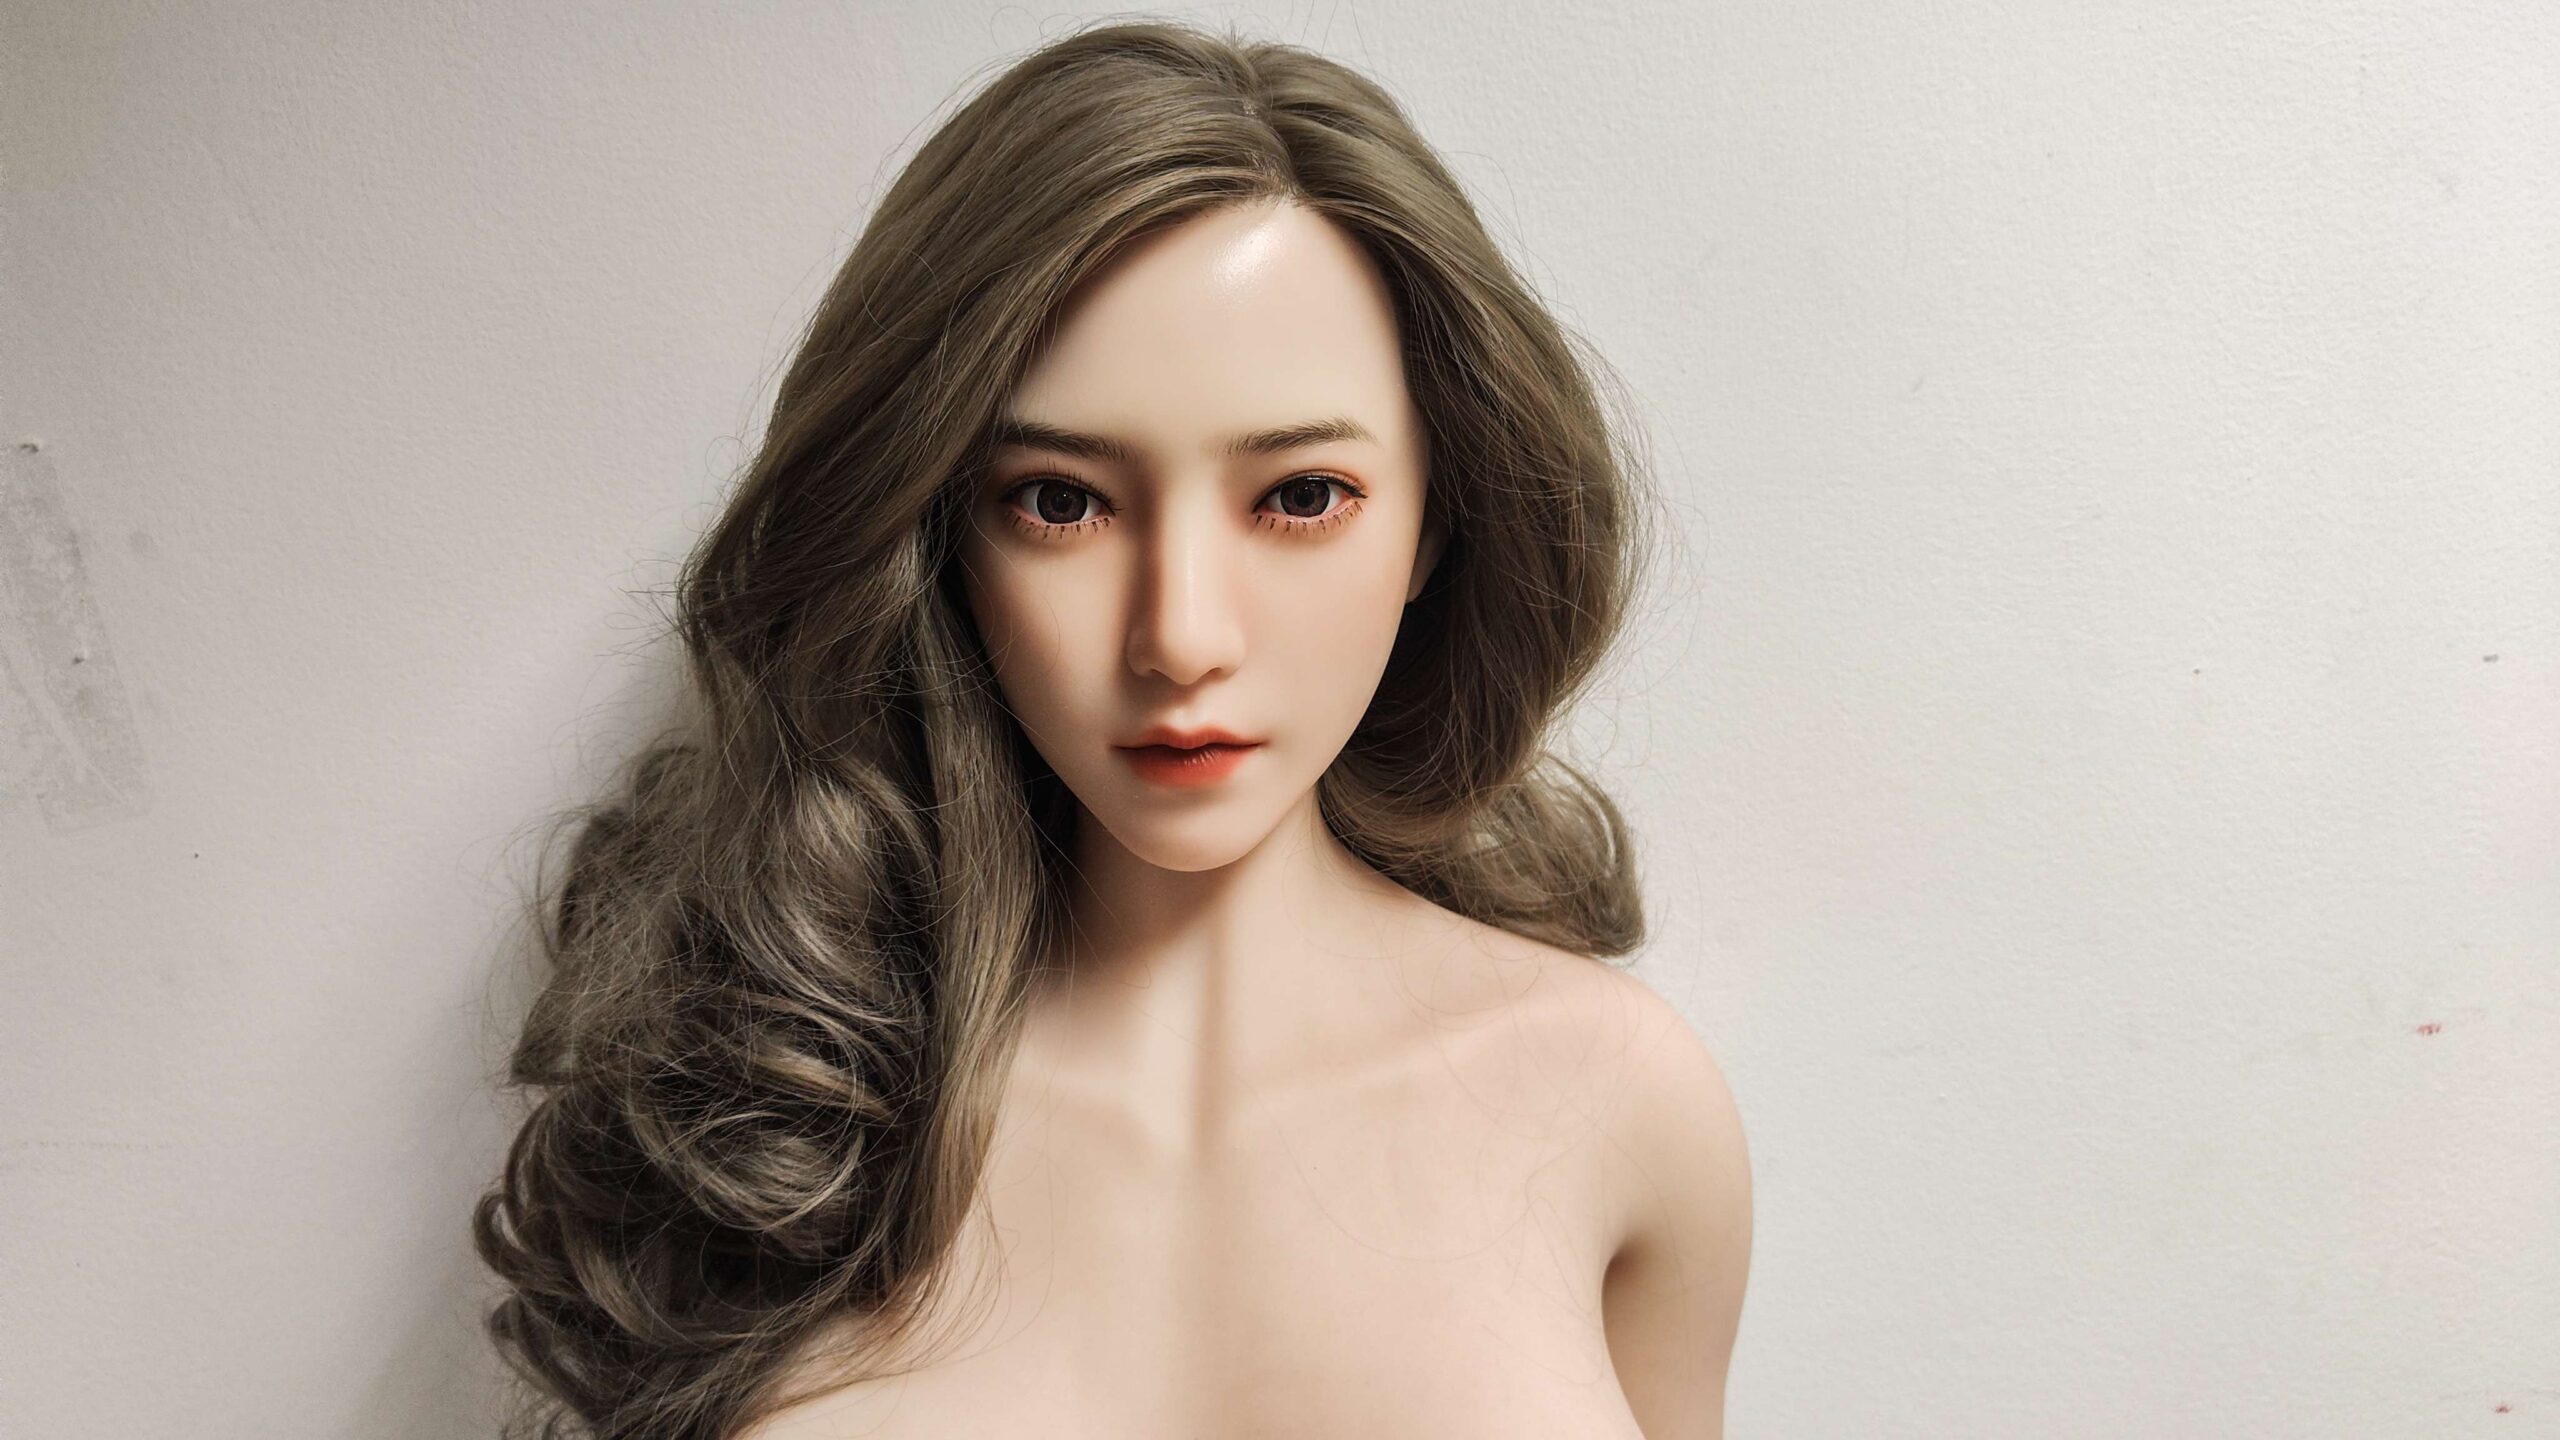 Five things to consider when getting adult dolls